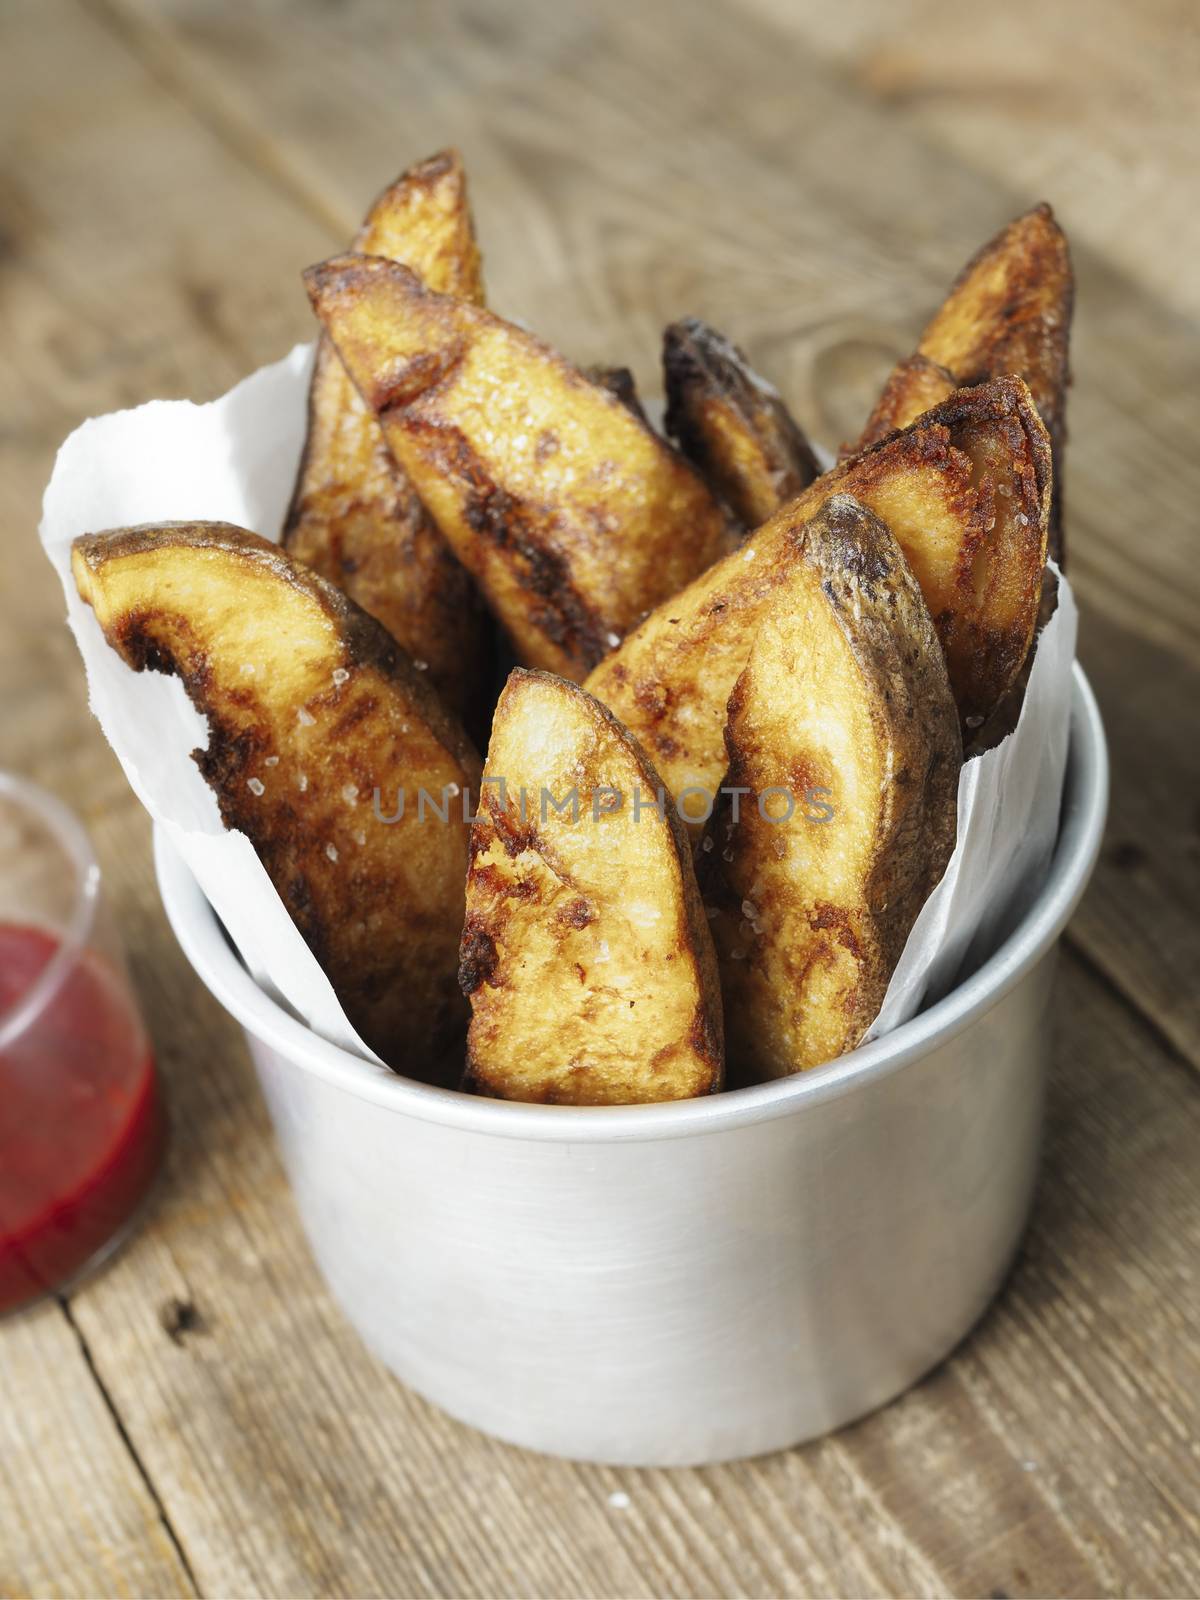 rustic english potato chips by zkruger